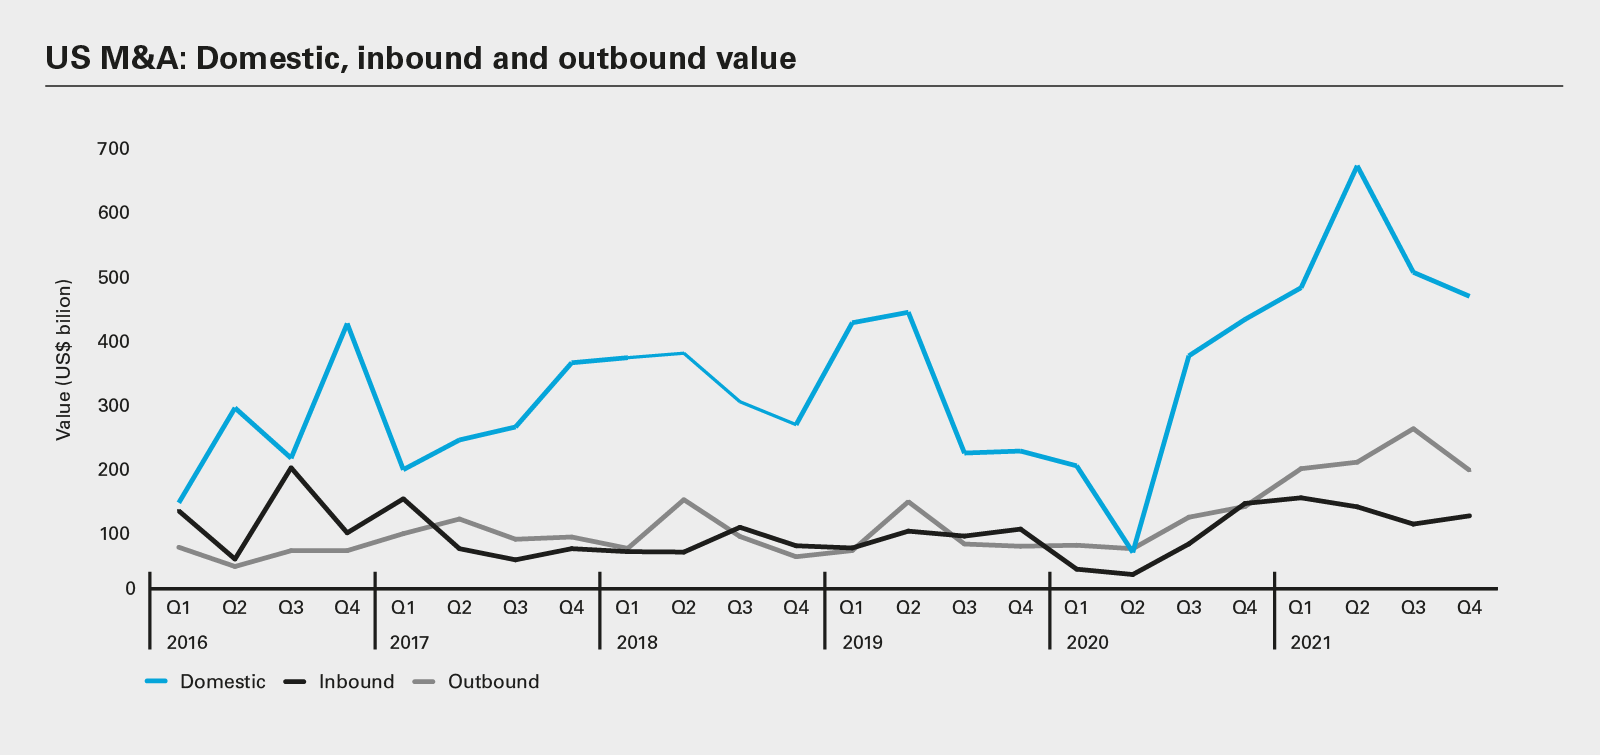 US M&A: Domestic, inbound and outbound value